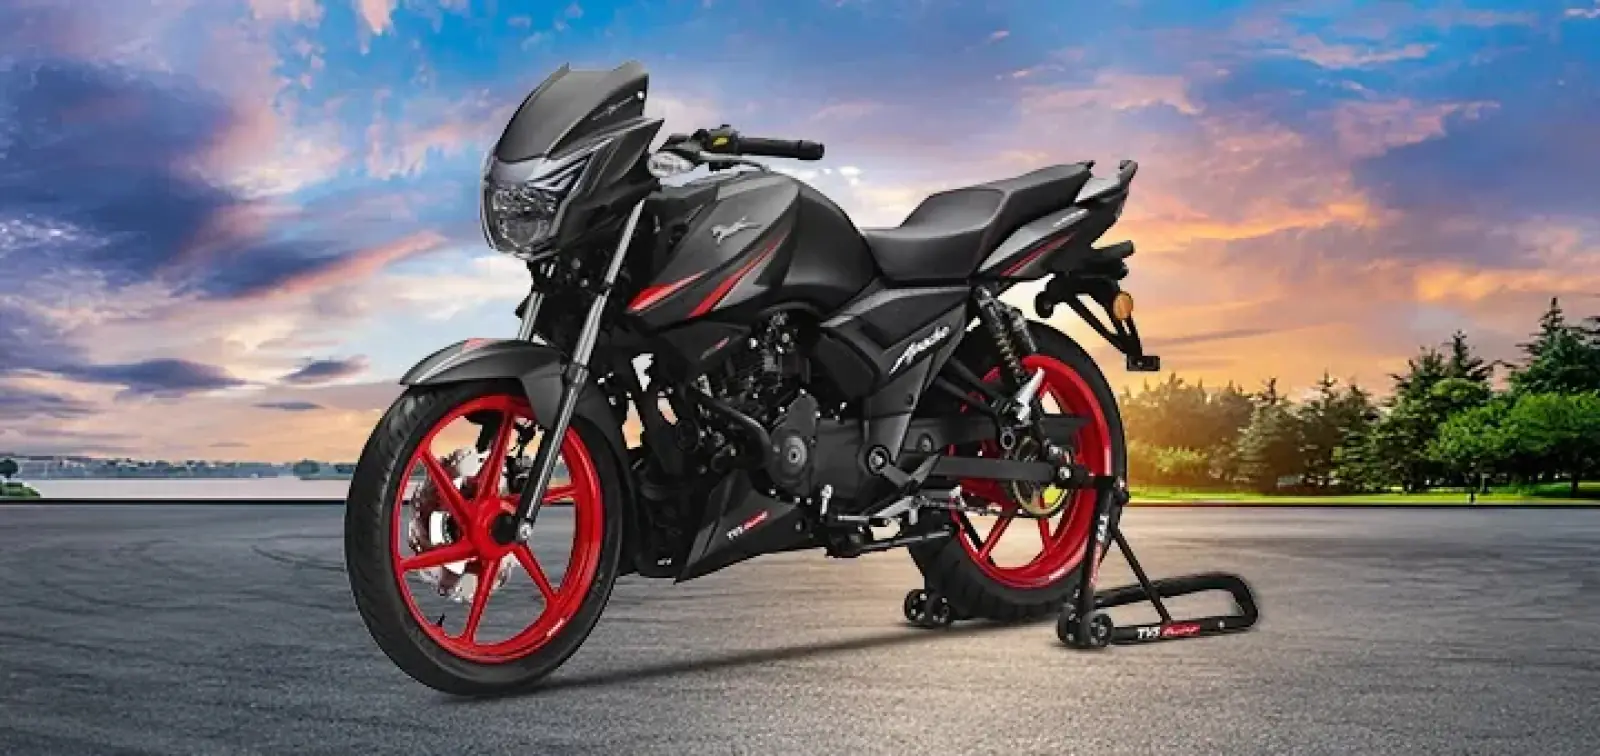 Apache RTR 160 Race Edition launched, more features with sporty look